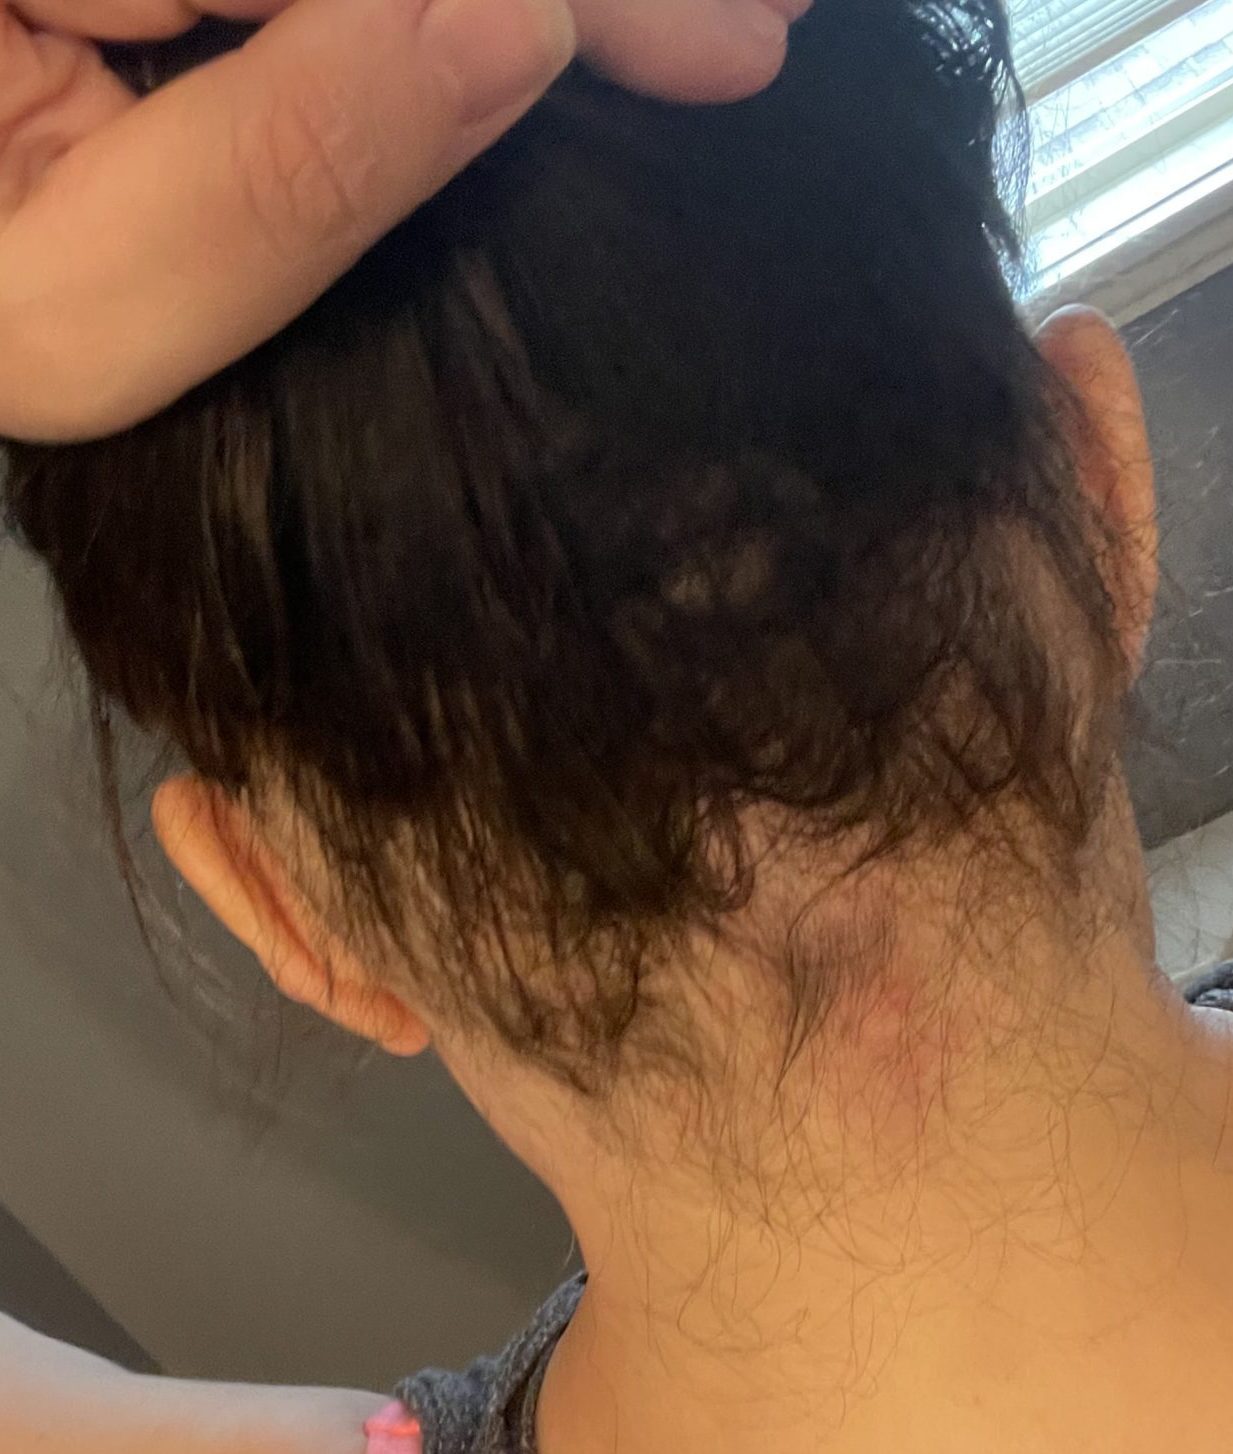 Ophiasis Alopecia Update: End Of May To End Of August